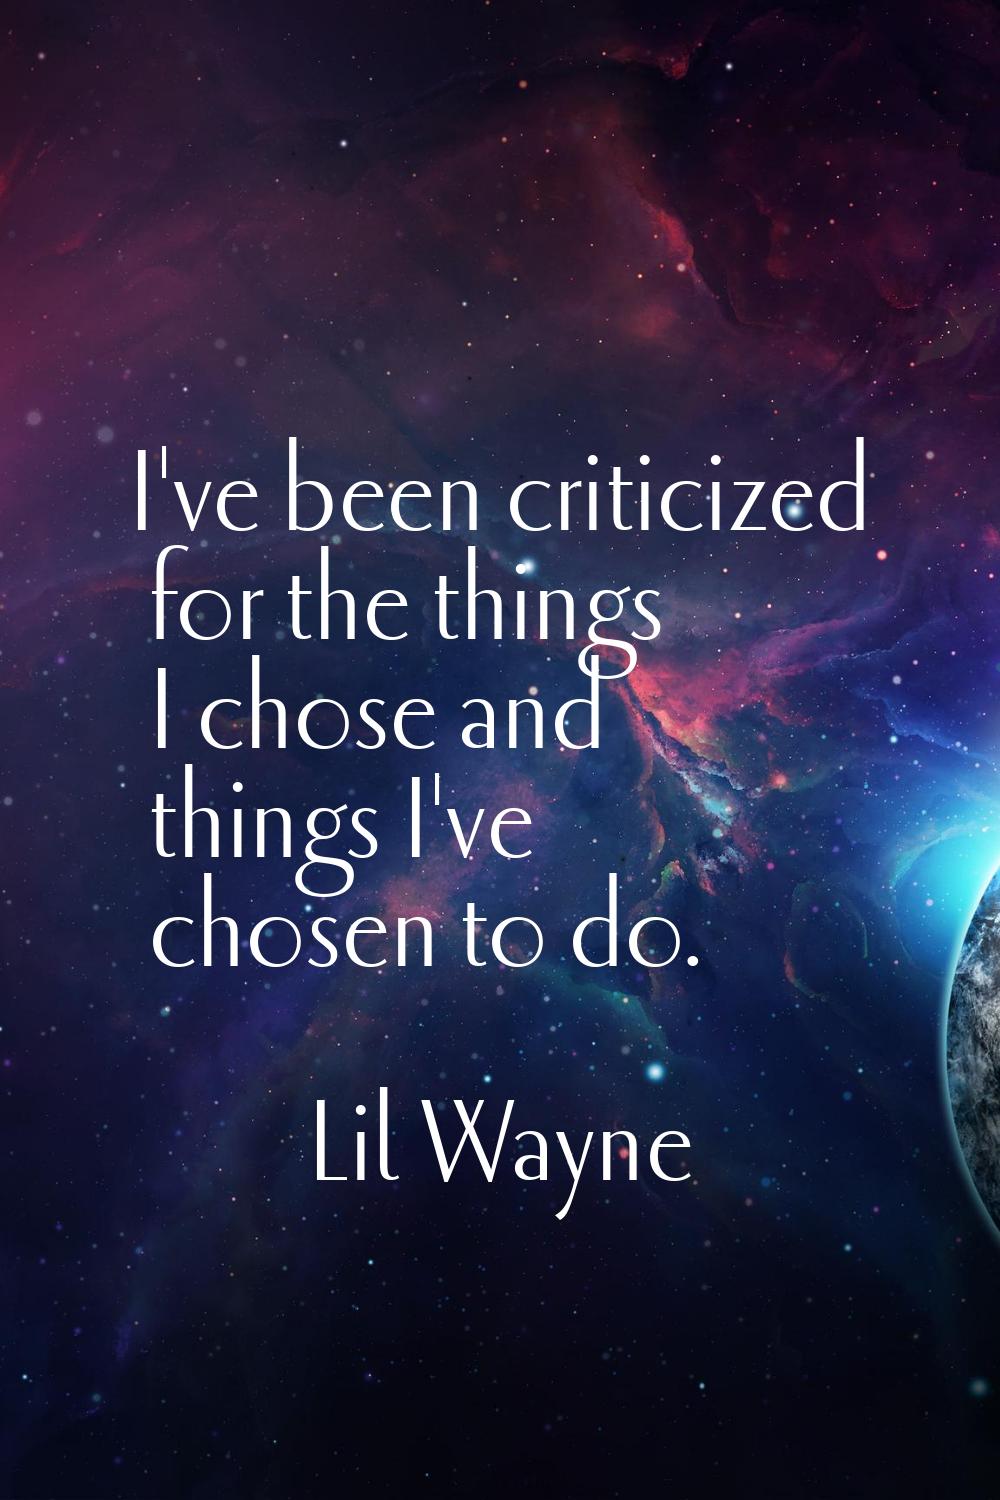 I've been criticized for the things I chose and things I've chosen to do.